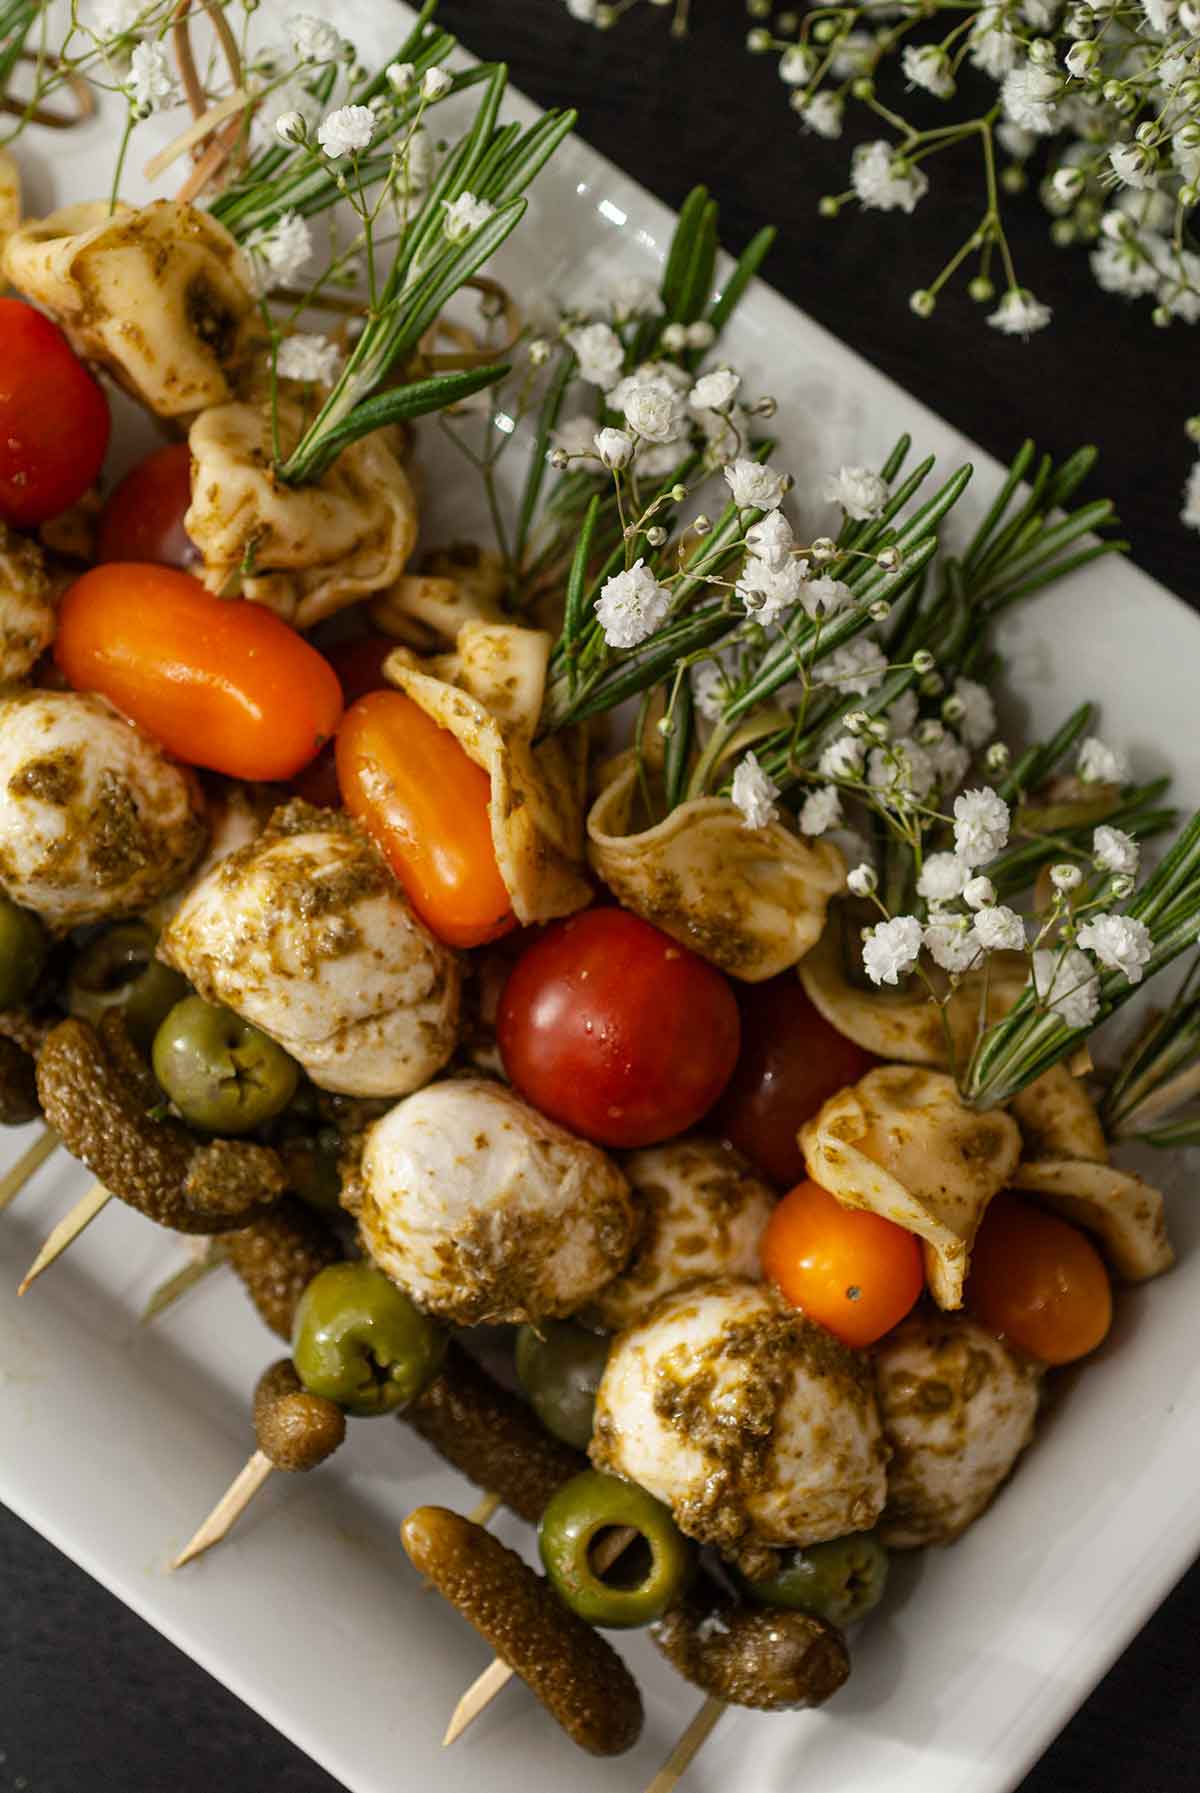 Antipasto skewers garnished with flowers and rosemary stacked on a plate.